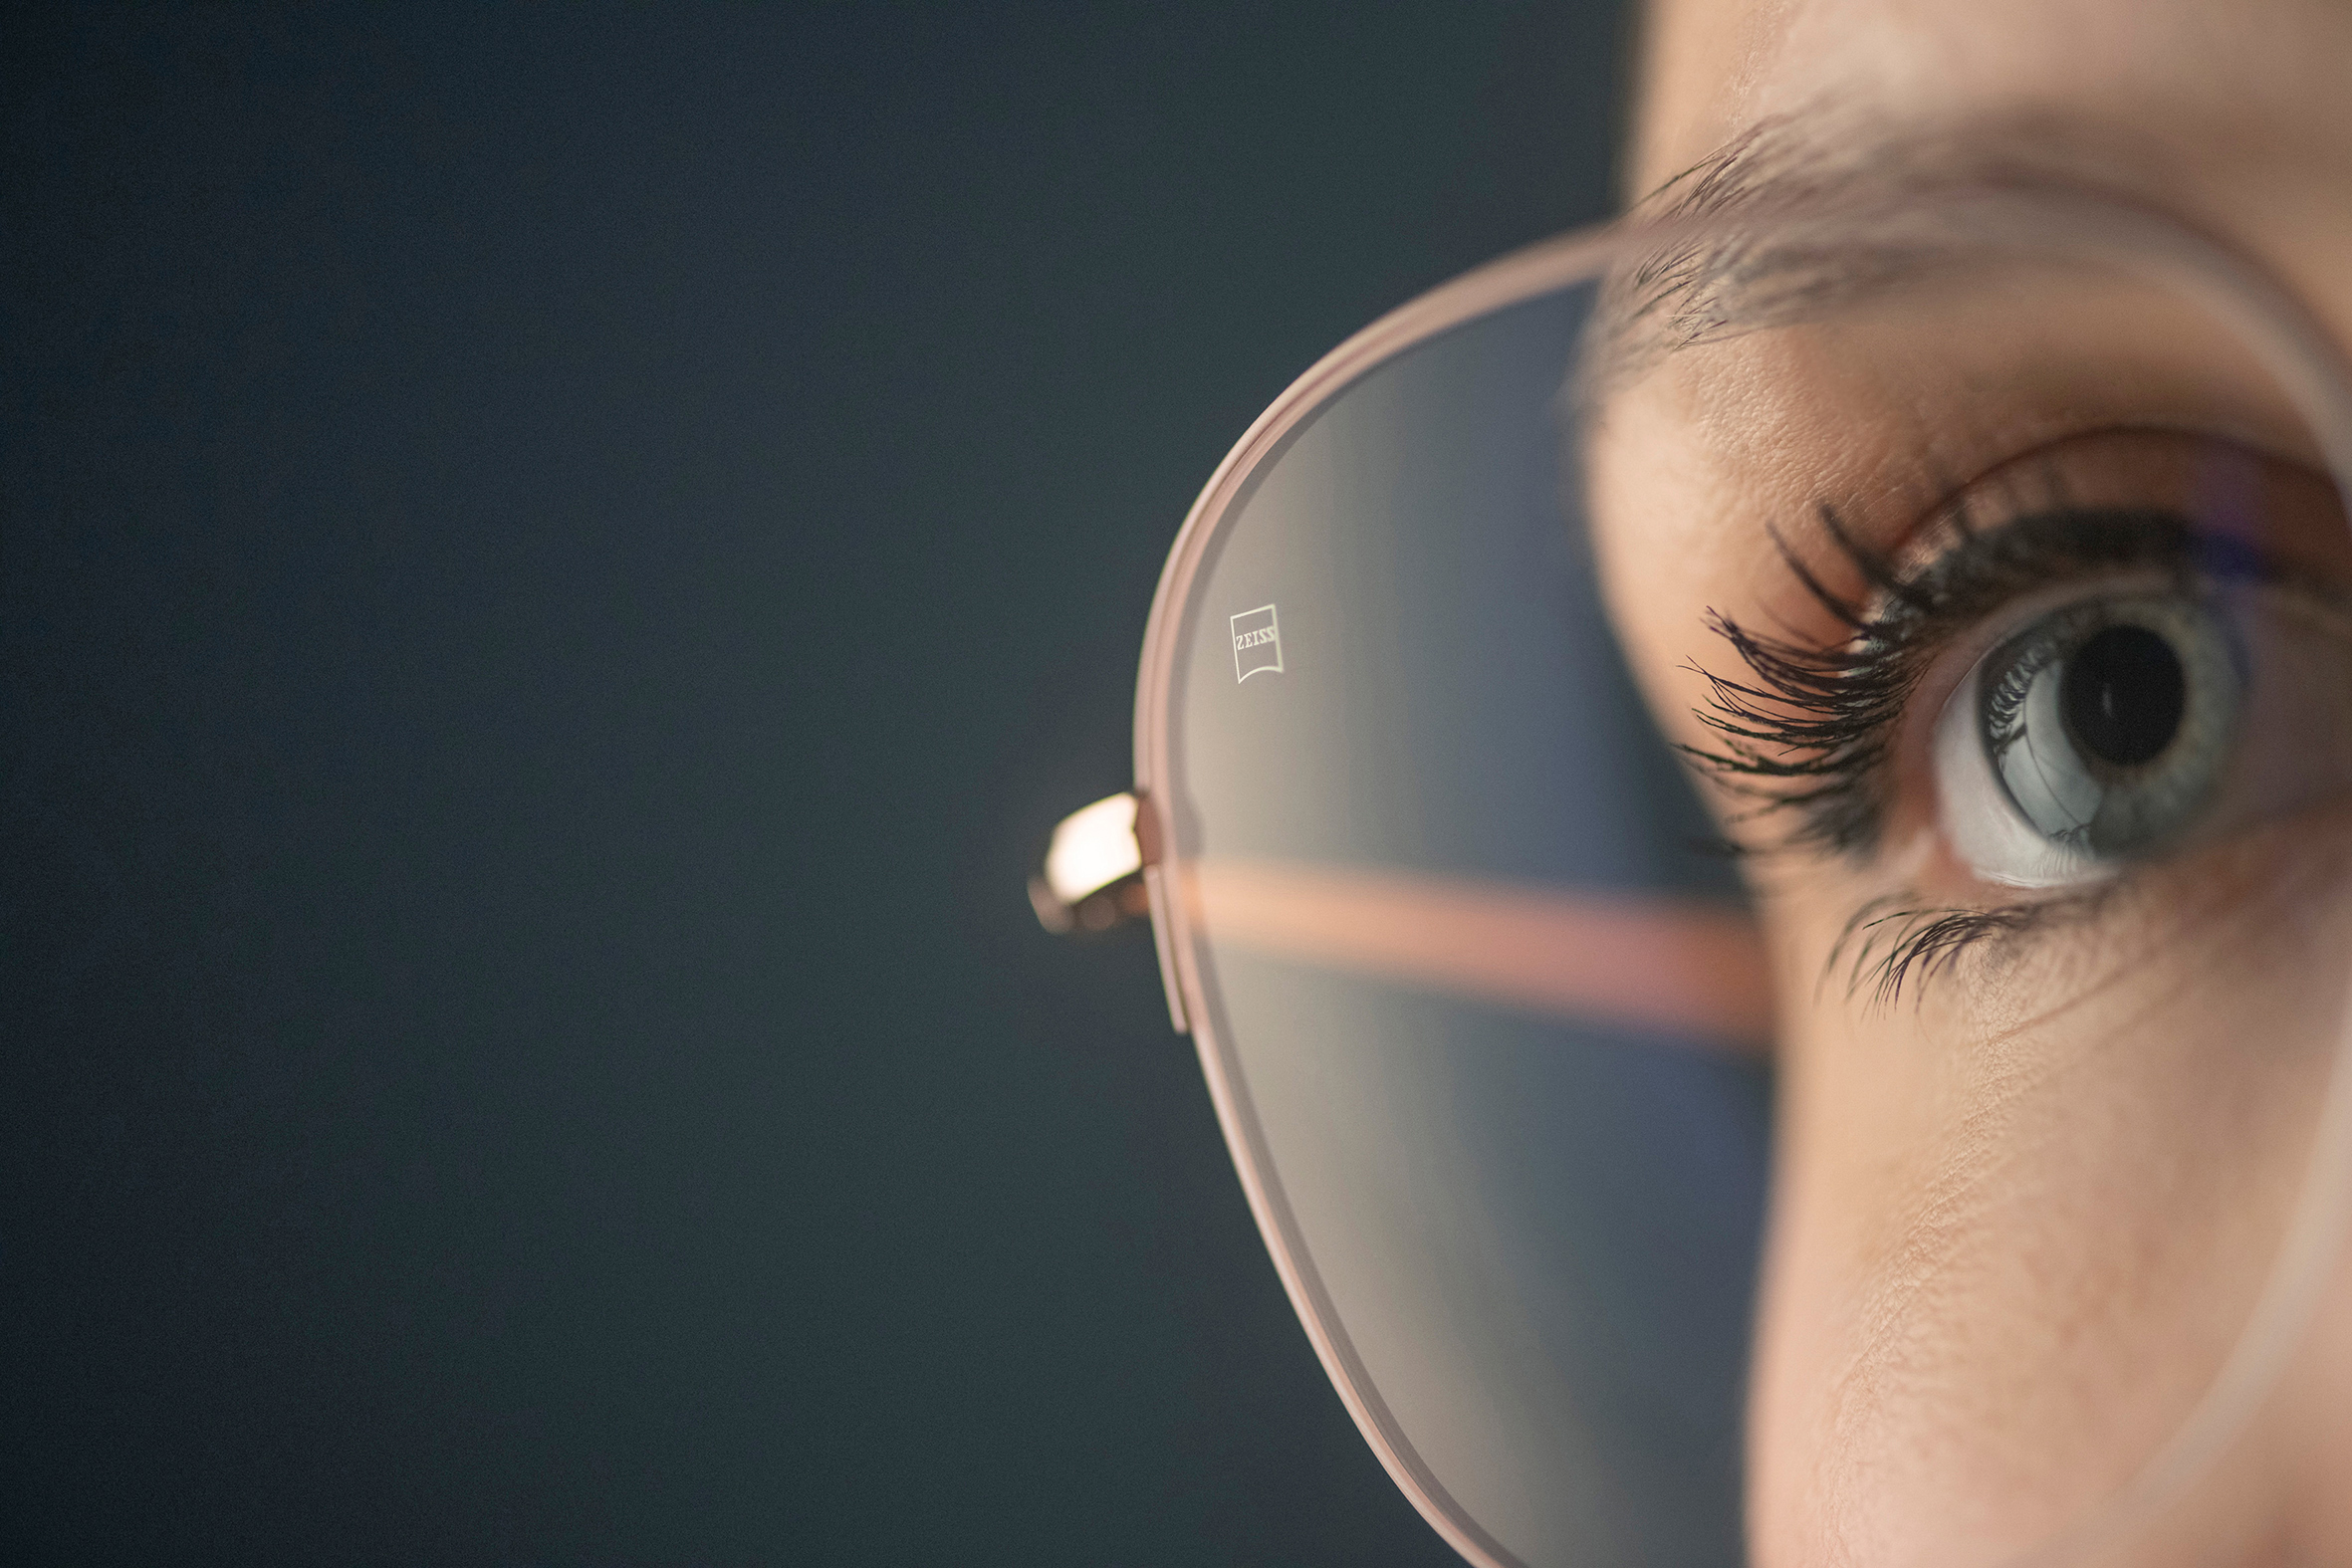 5 Unique Eyeglass Lens Combinations for a Fashionable Look - ZEISS Eye Care  Professional Blog